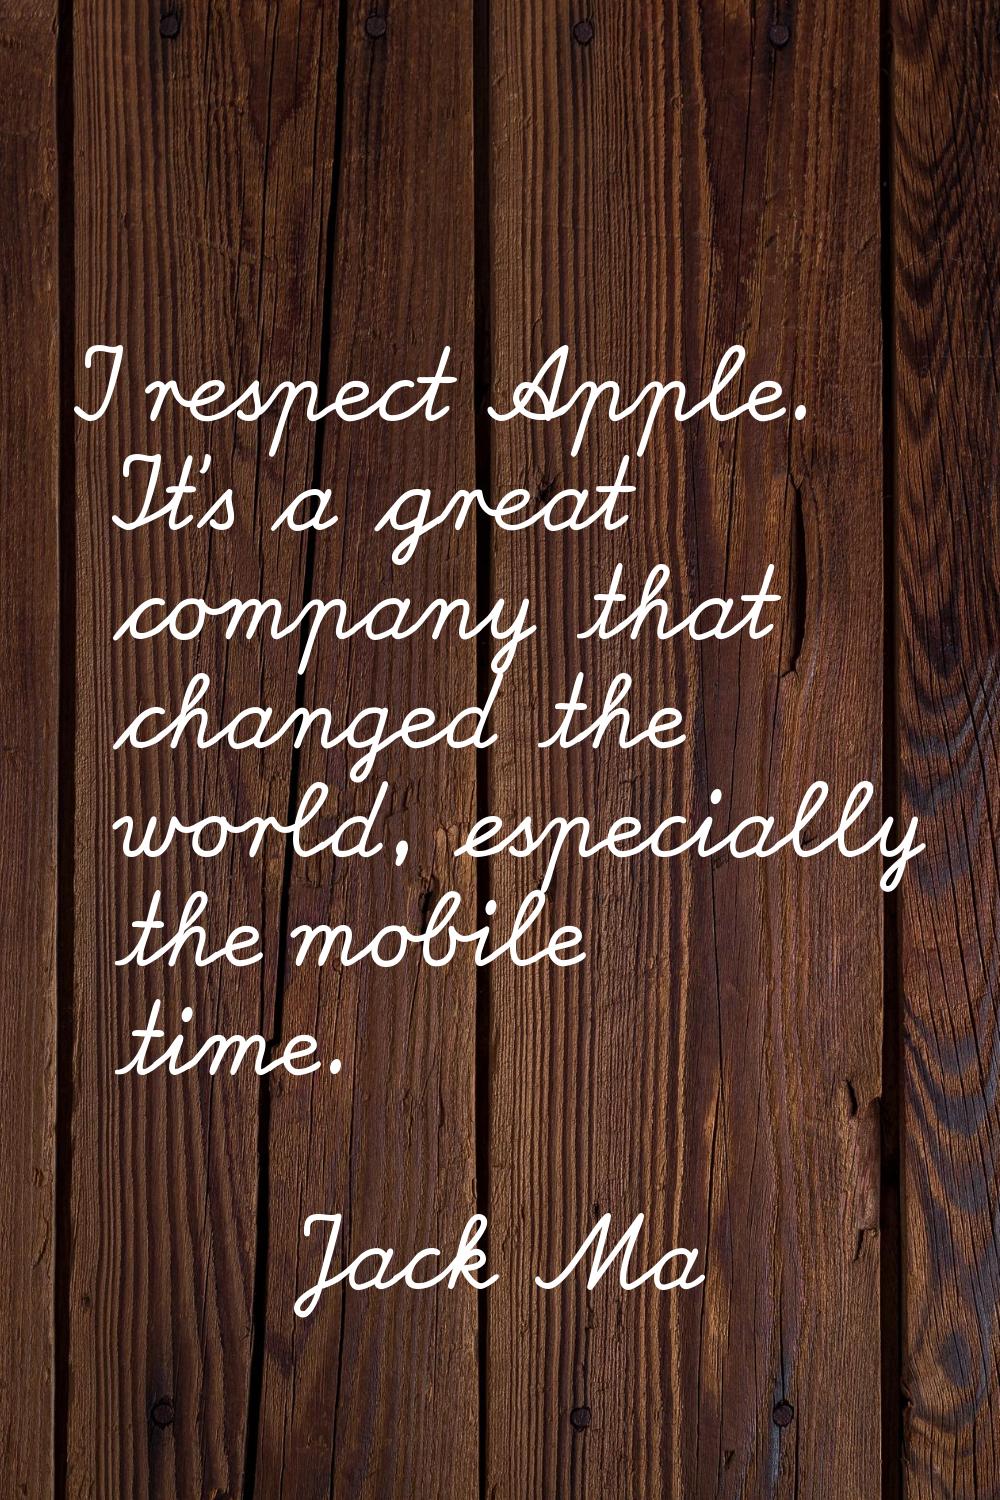 I respect Apple. It's a great company that changed the world, especially the mobile time.